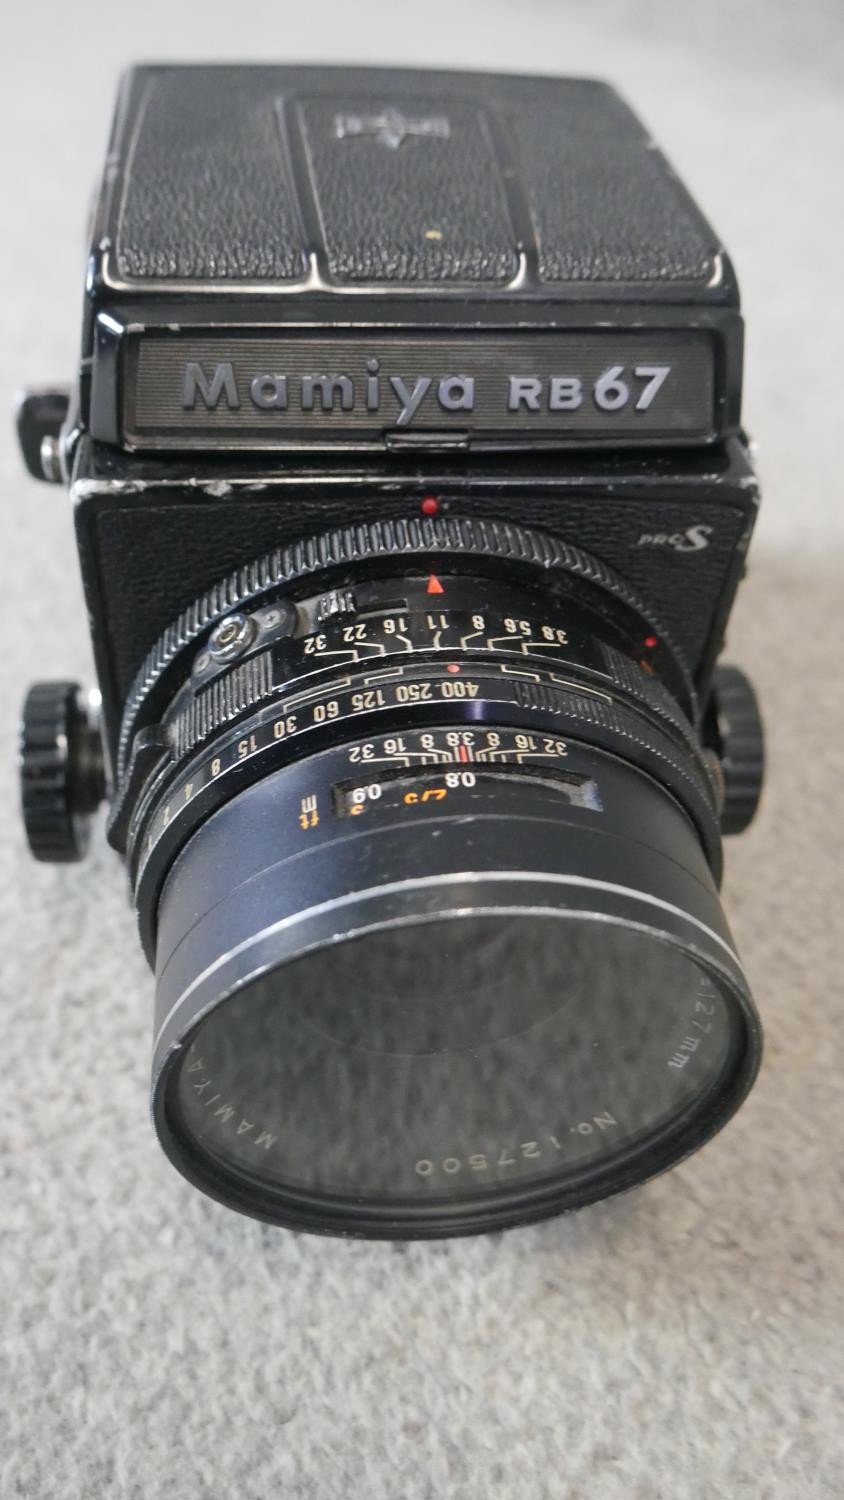 A Mamiya RB67 camera with metered prisms, lenses and film backs with brown leather carrying case. - Image 2 of 5